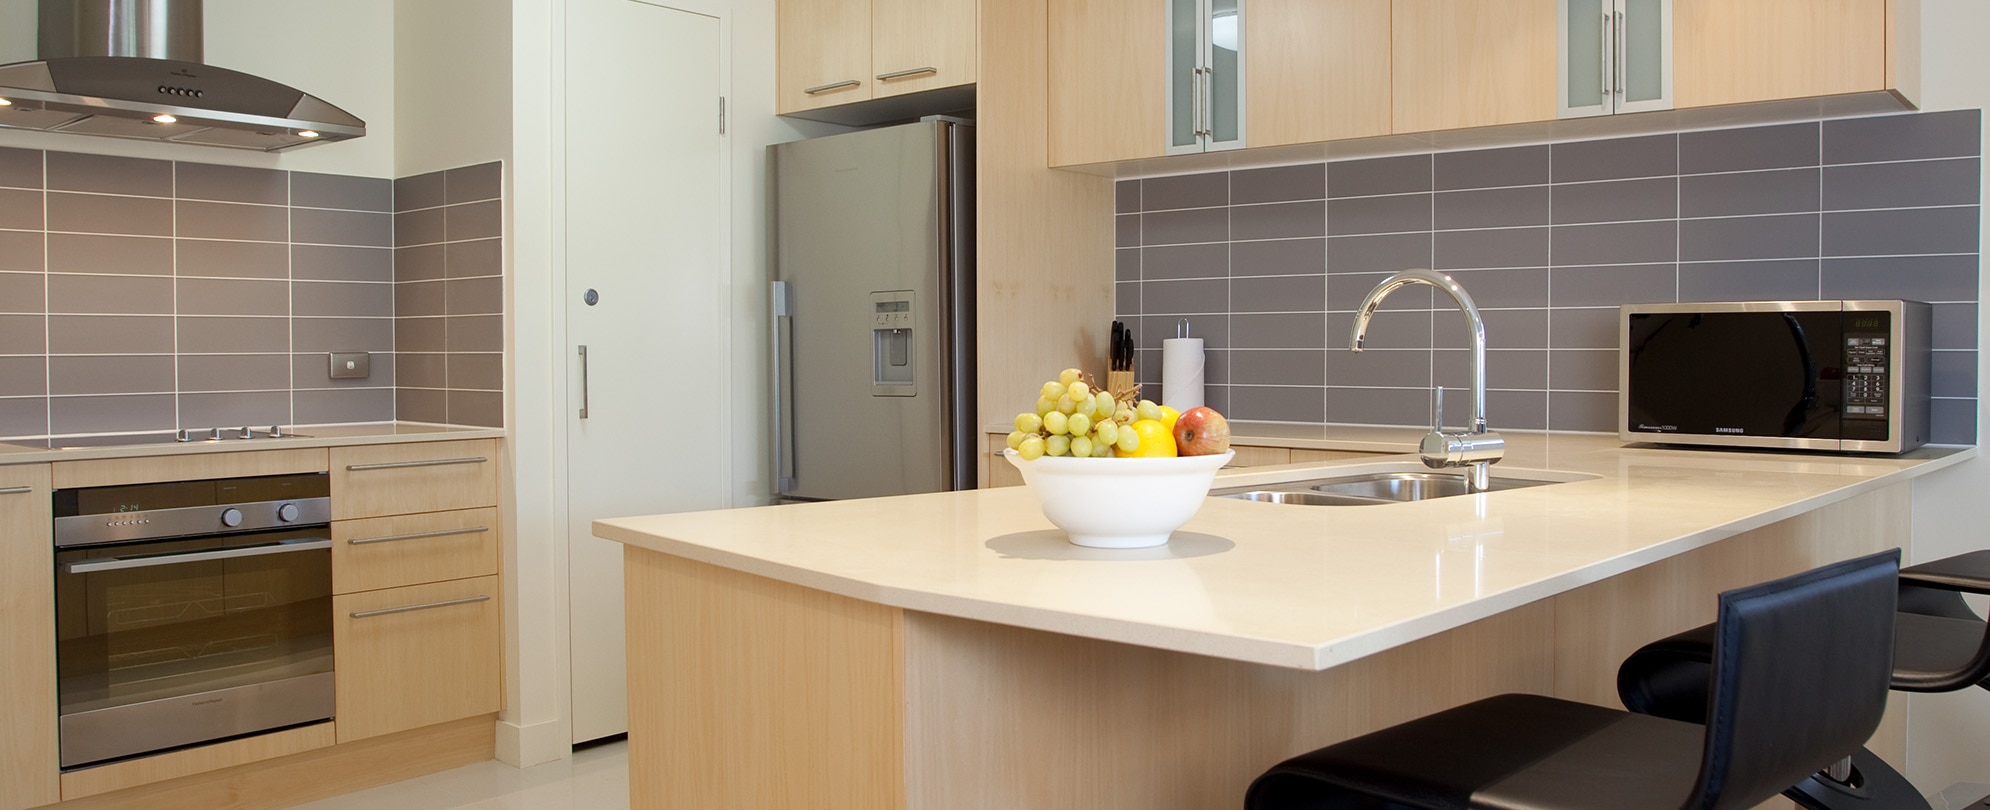 The kitchen of a 2-bedroom deluxe suite at Club Wyndham Coffs Harbor.